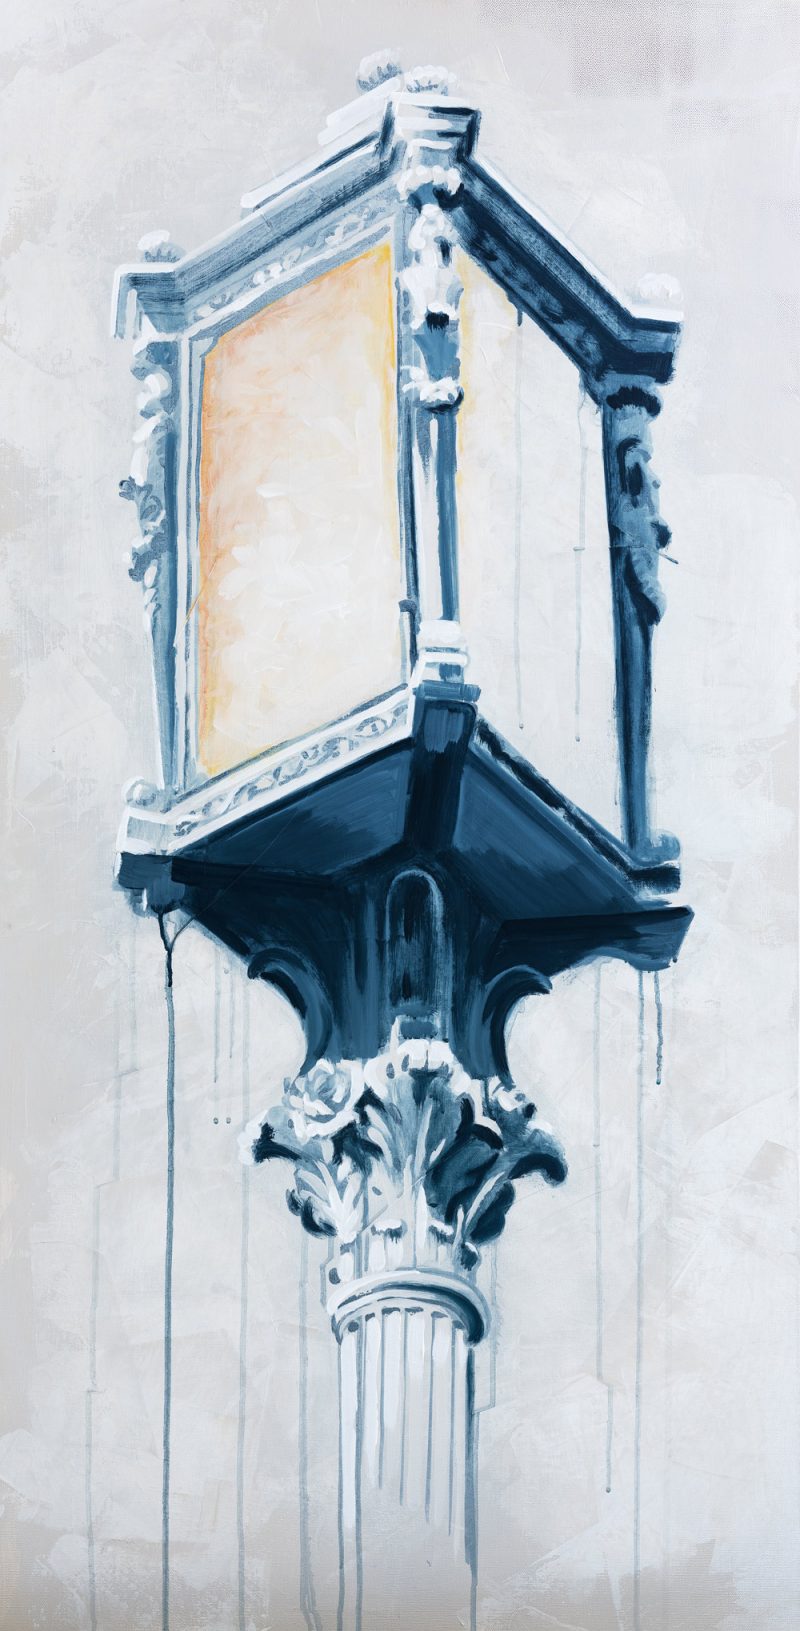 “Through Town and Right,” by Teale Hatheway is an historic street light painting in cream, blue and soft yellow colors.